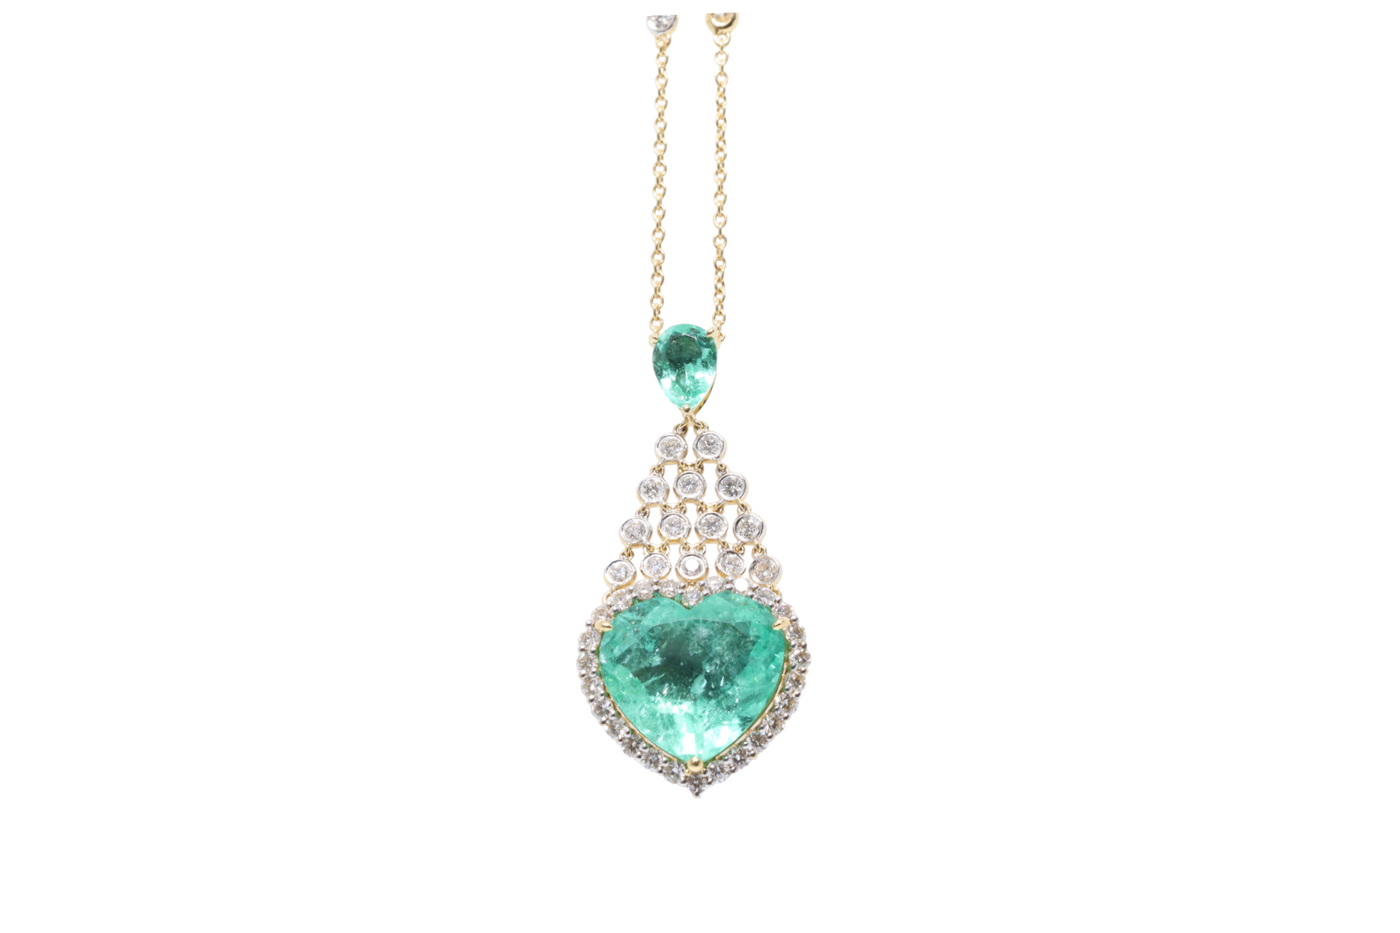 18CT yellow gold colombian emerald and diamond pendant and necklace